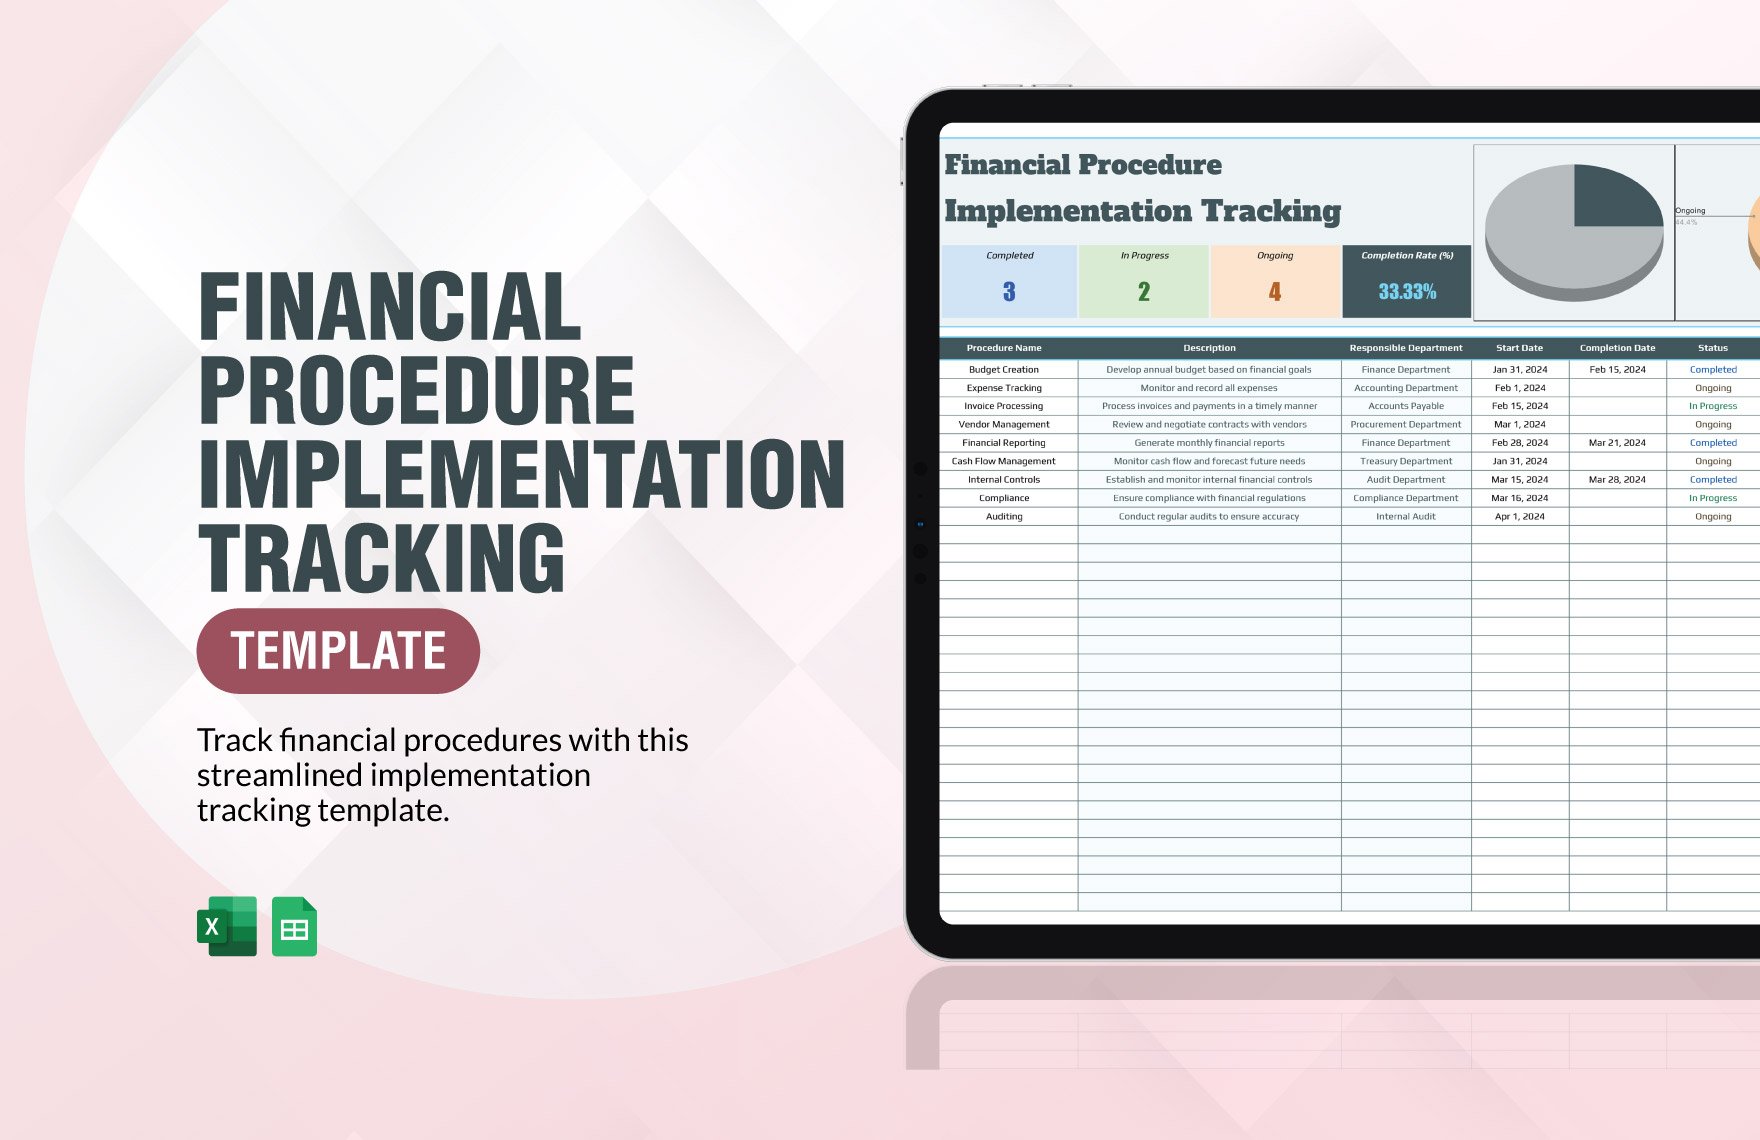 Financial Procedure Implementation Tracking Template in Excel, Google Sheets